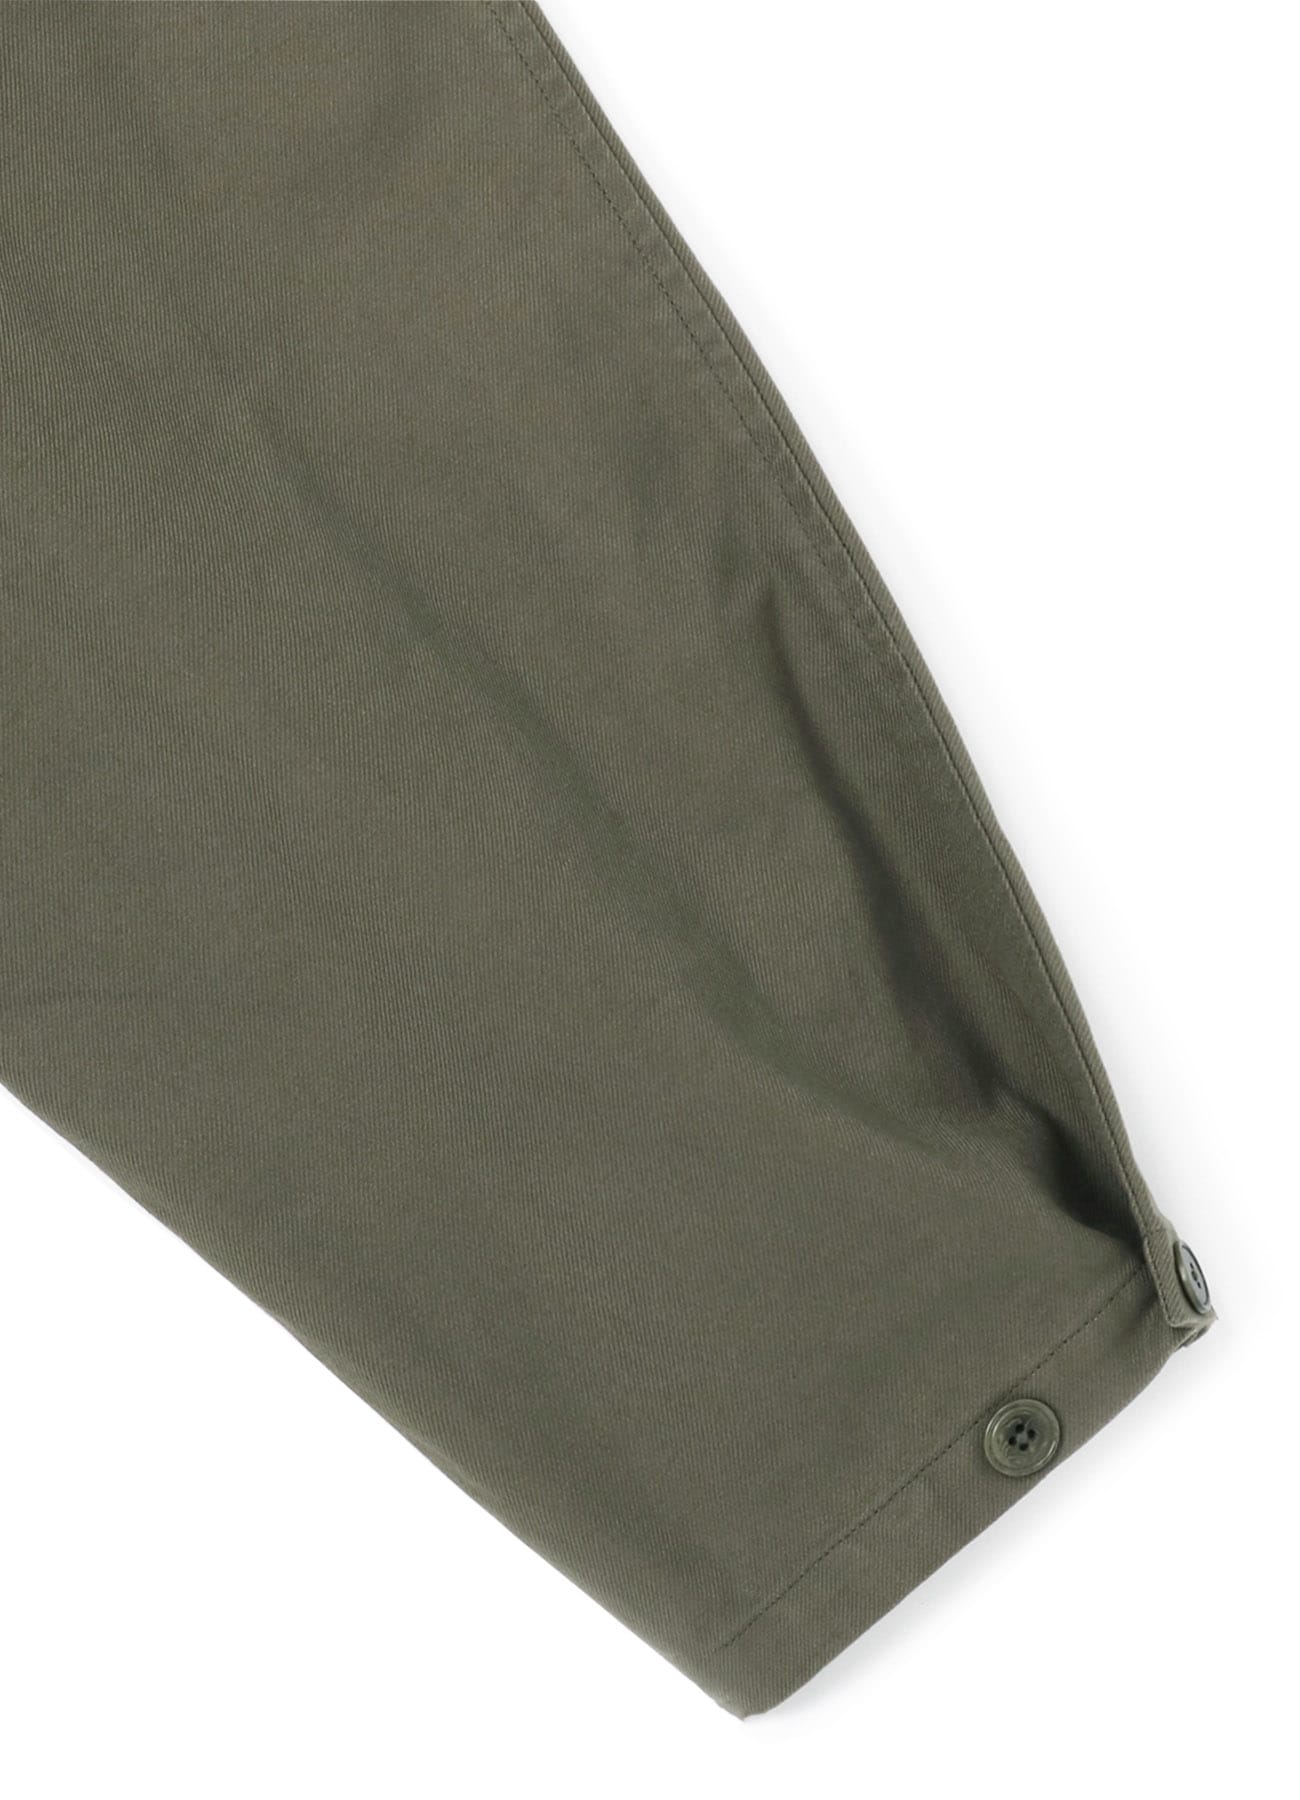 FRENCH WORKER SURGE SUSPENDER PANTS WITH HEM BUTTON DETAIL(M Olive green):  S'YTE｜THE SHOP YOHJI YAMAMOTO